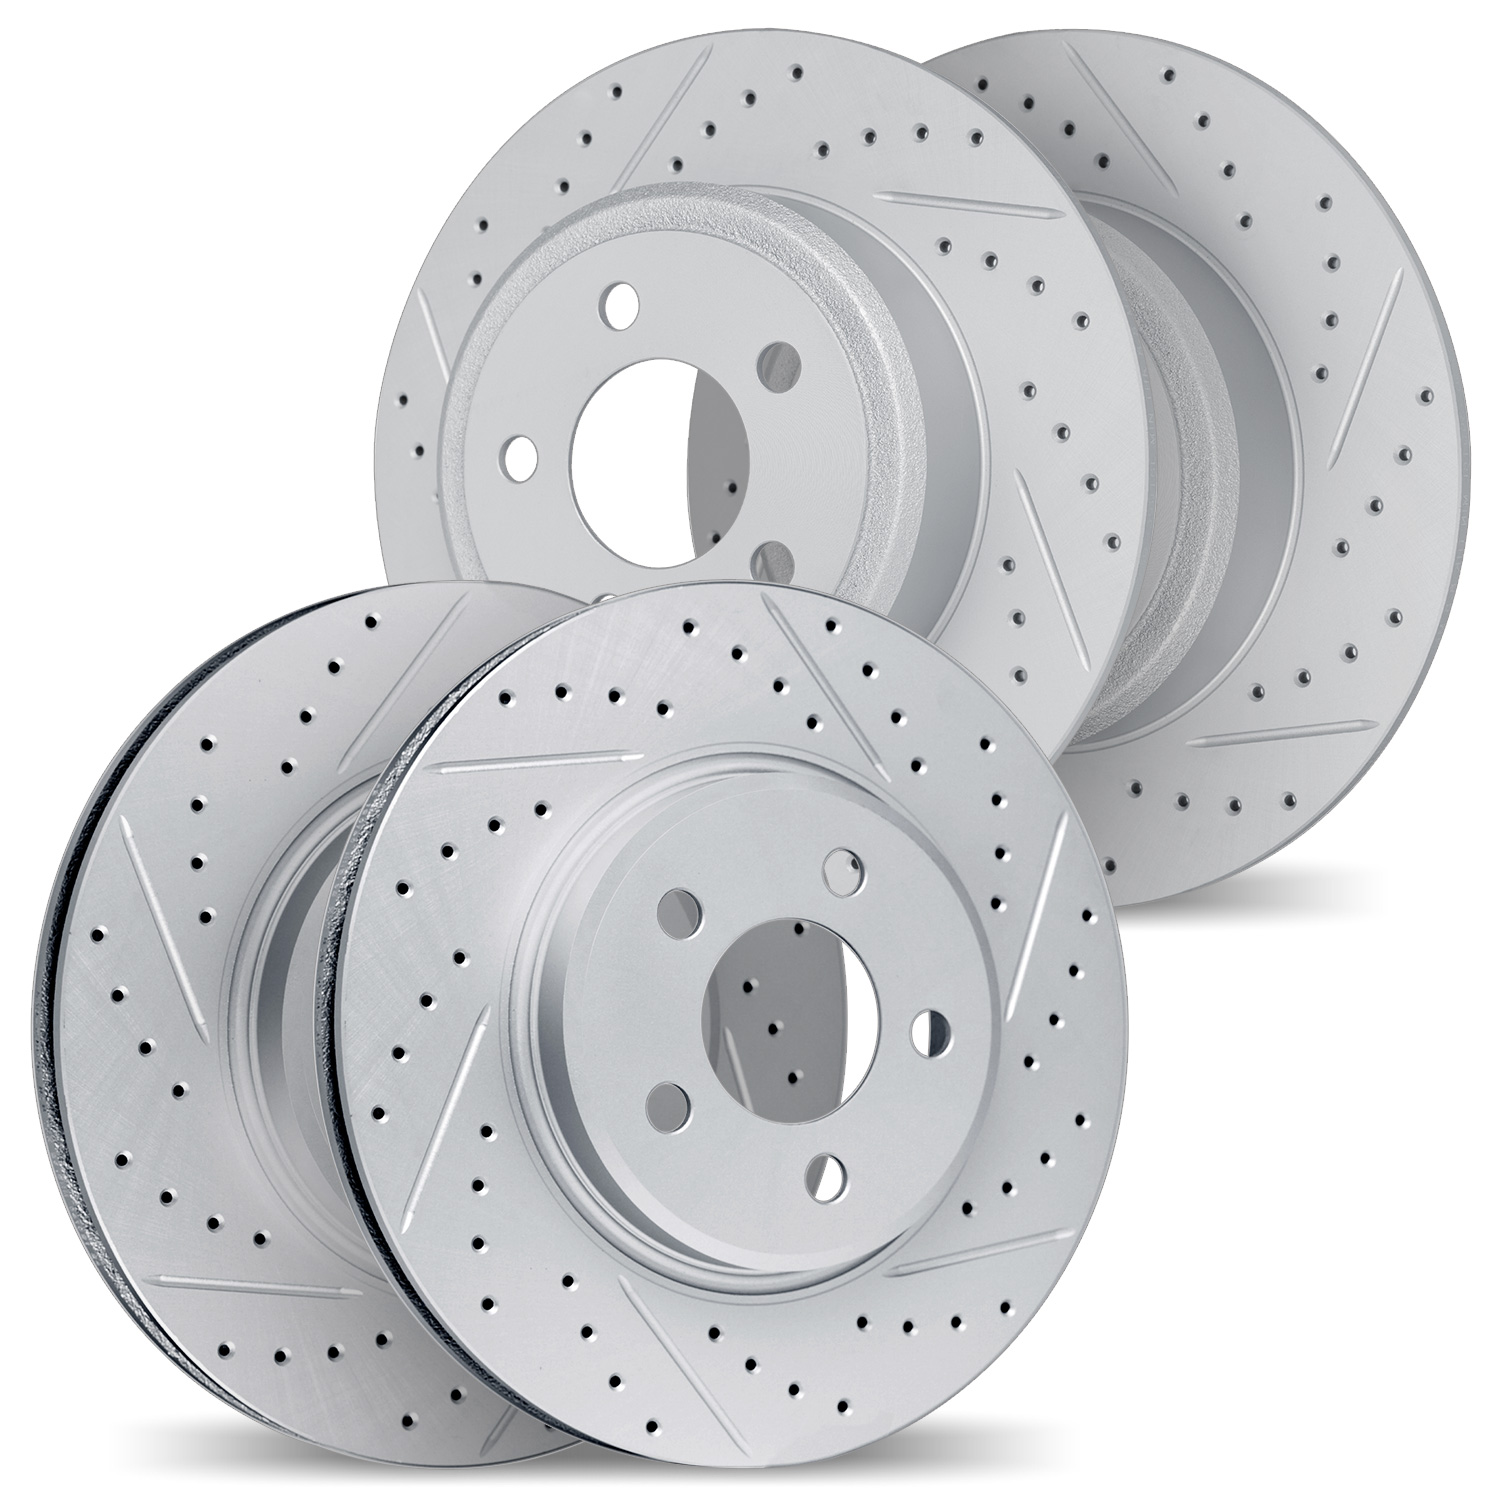 2004-54066 Geoperformance Drilled/Slotted Brake Rotors, 1995-2002 Ford/Lincoln/Mercury/Mazda, Position: Front and Rear